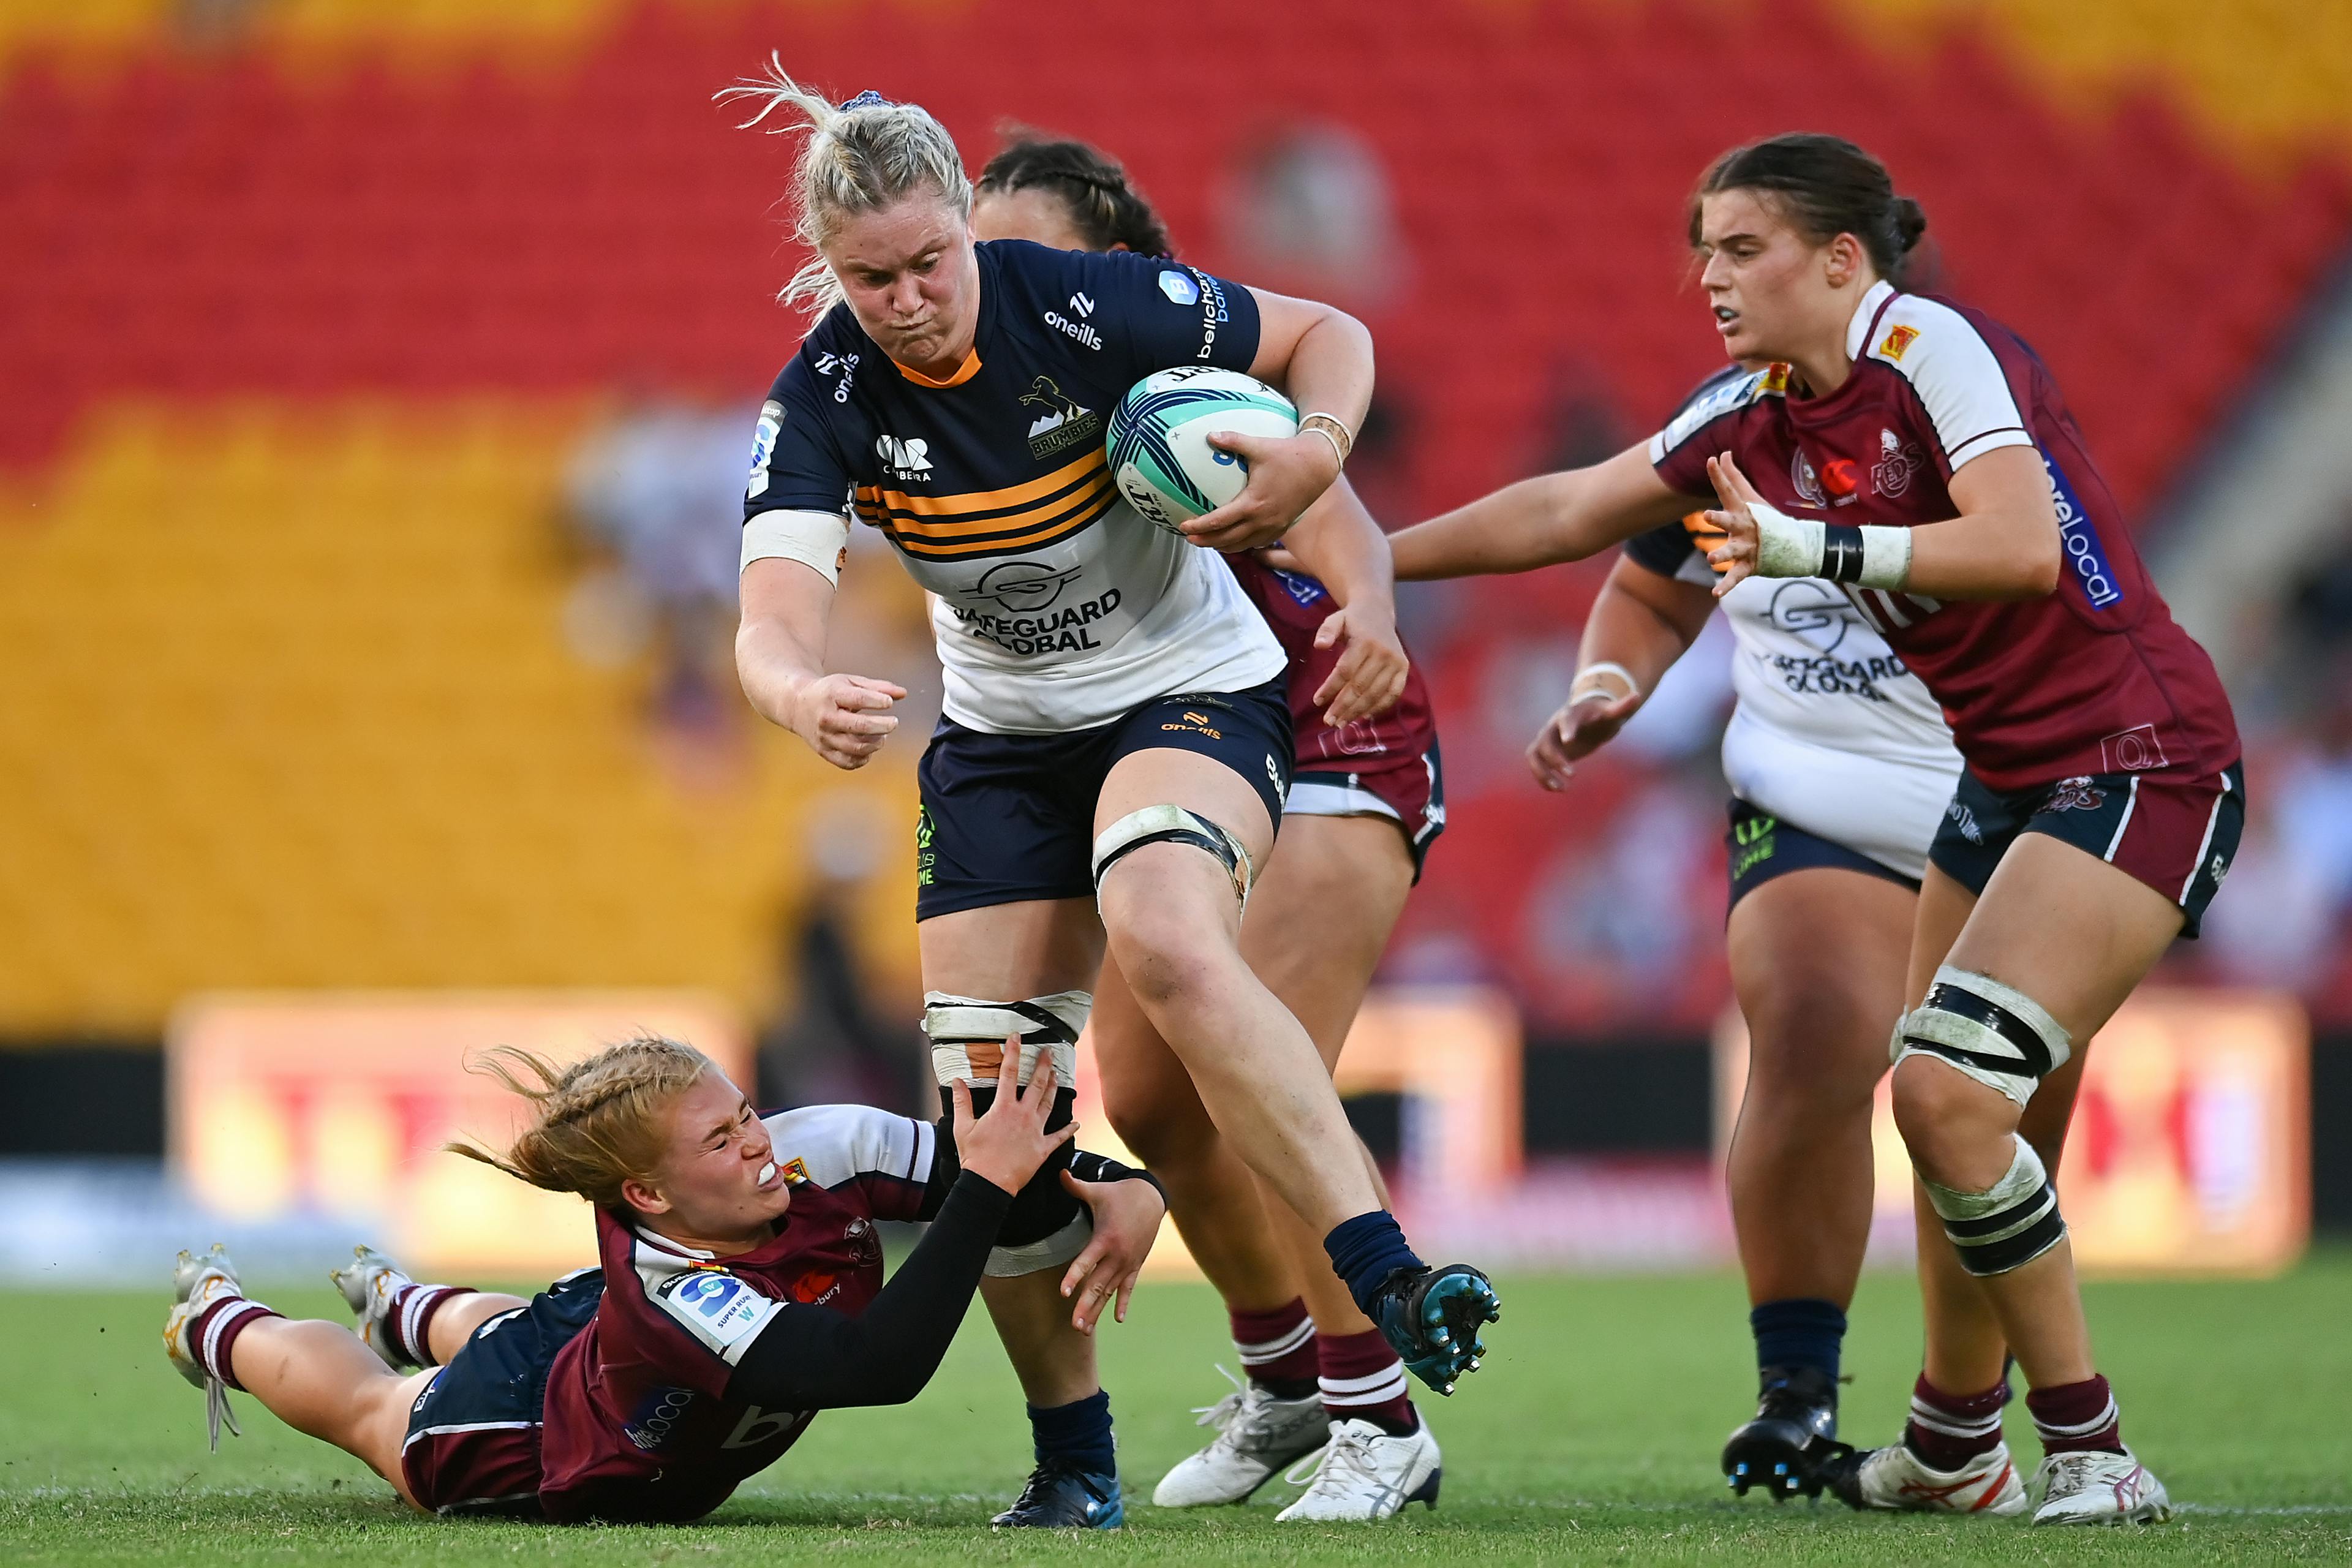 Kate Holland takes a strong run during the Brumbies win over the Reds.